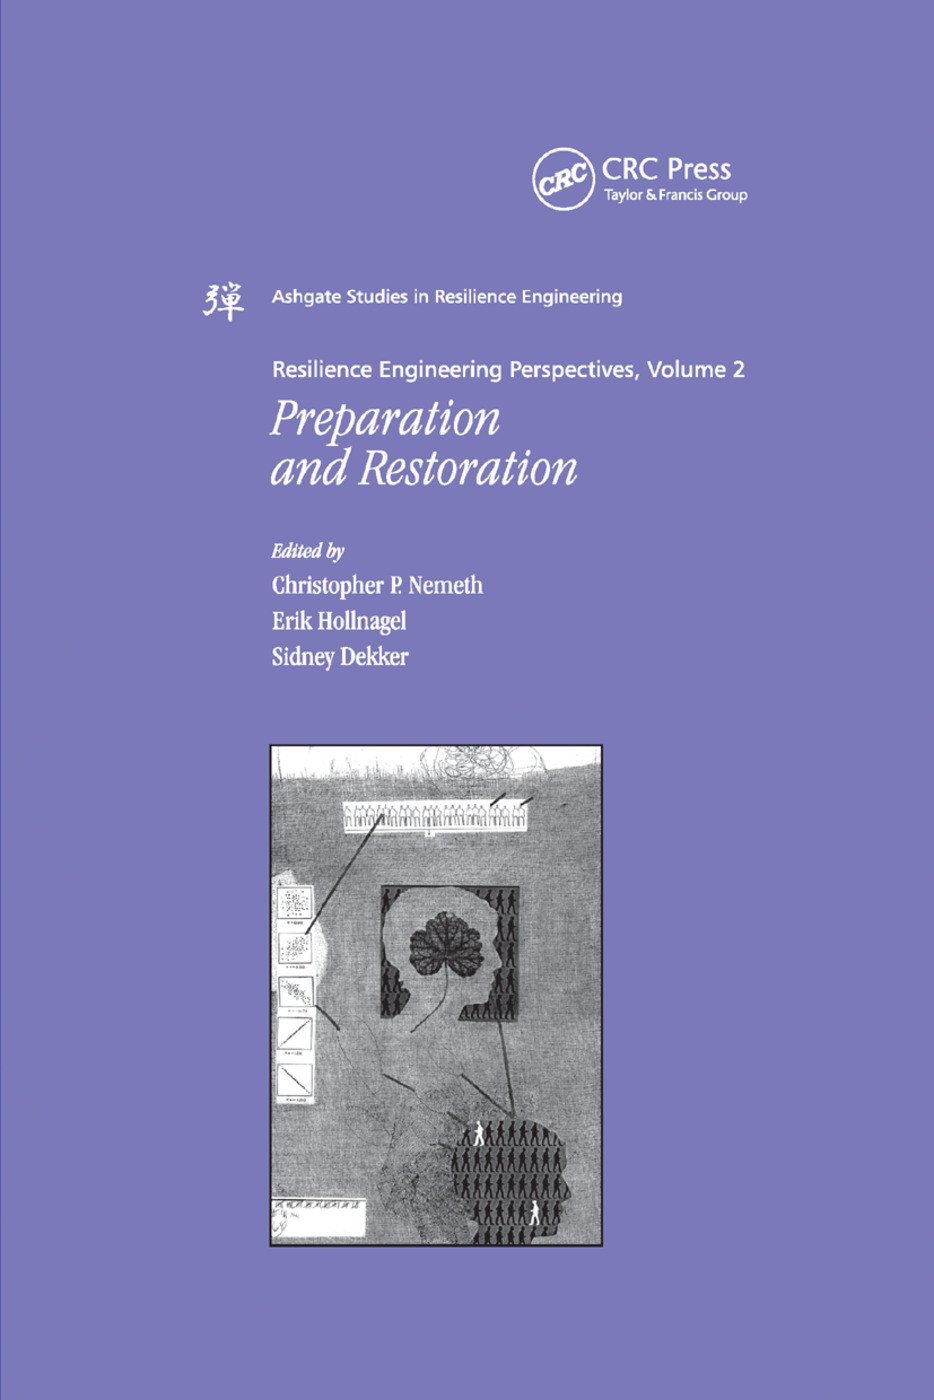 Resilience Engineering Perspectives, Volume 2: Preparation and Restoration